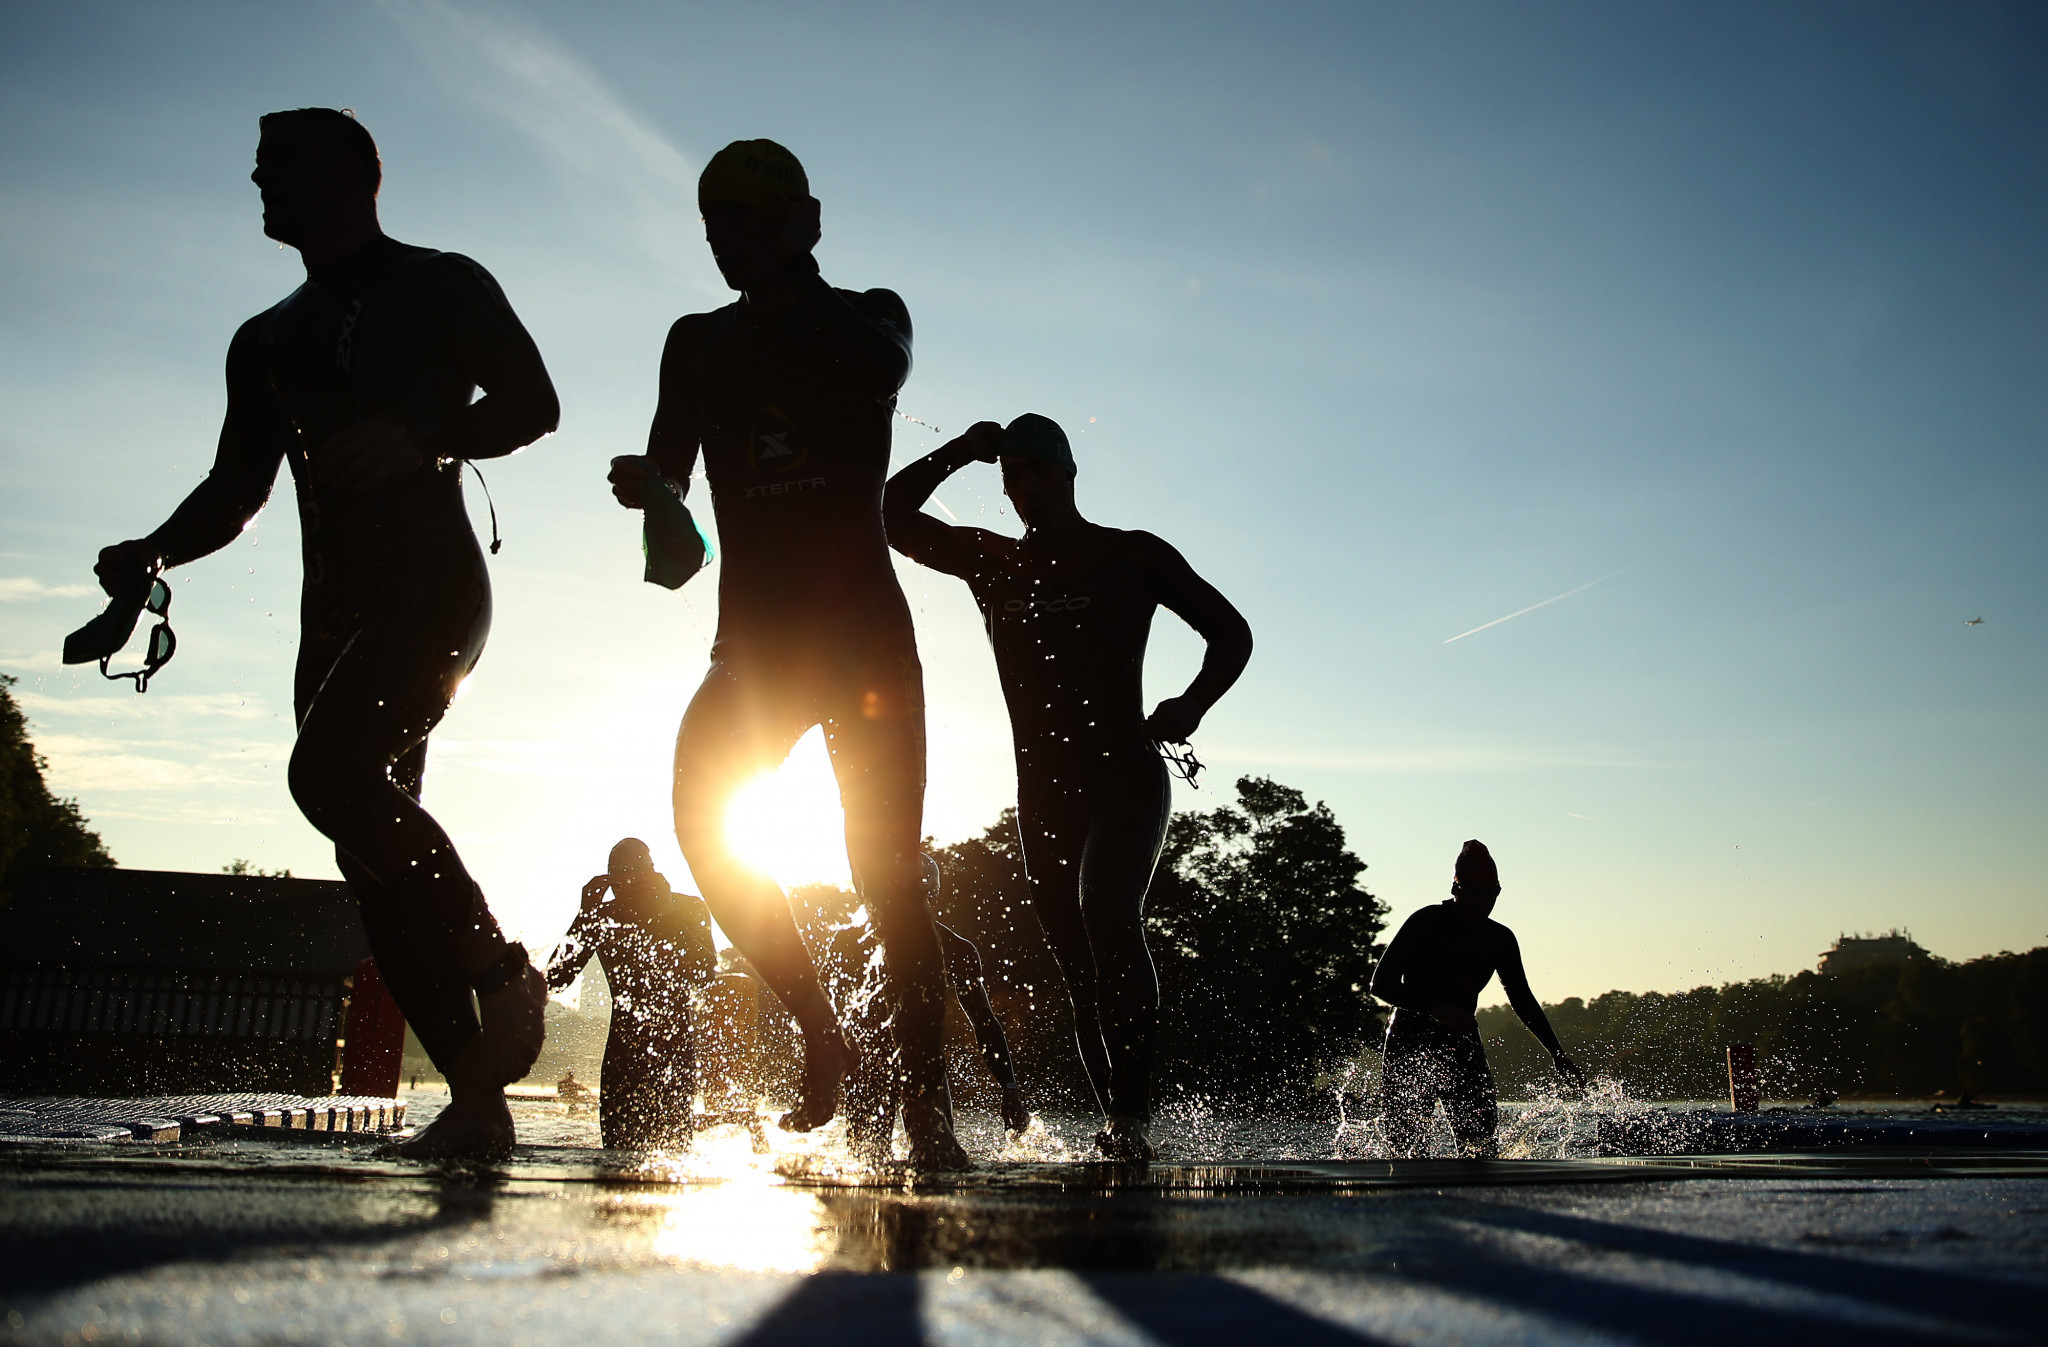 World Triathlon to allow transgender athletes in women's events with tougher requirements